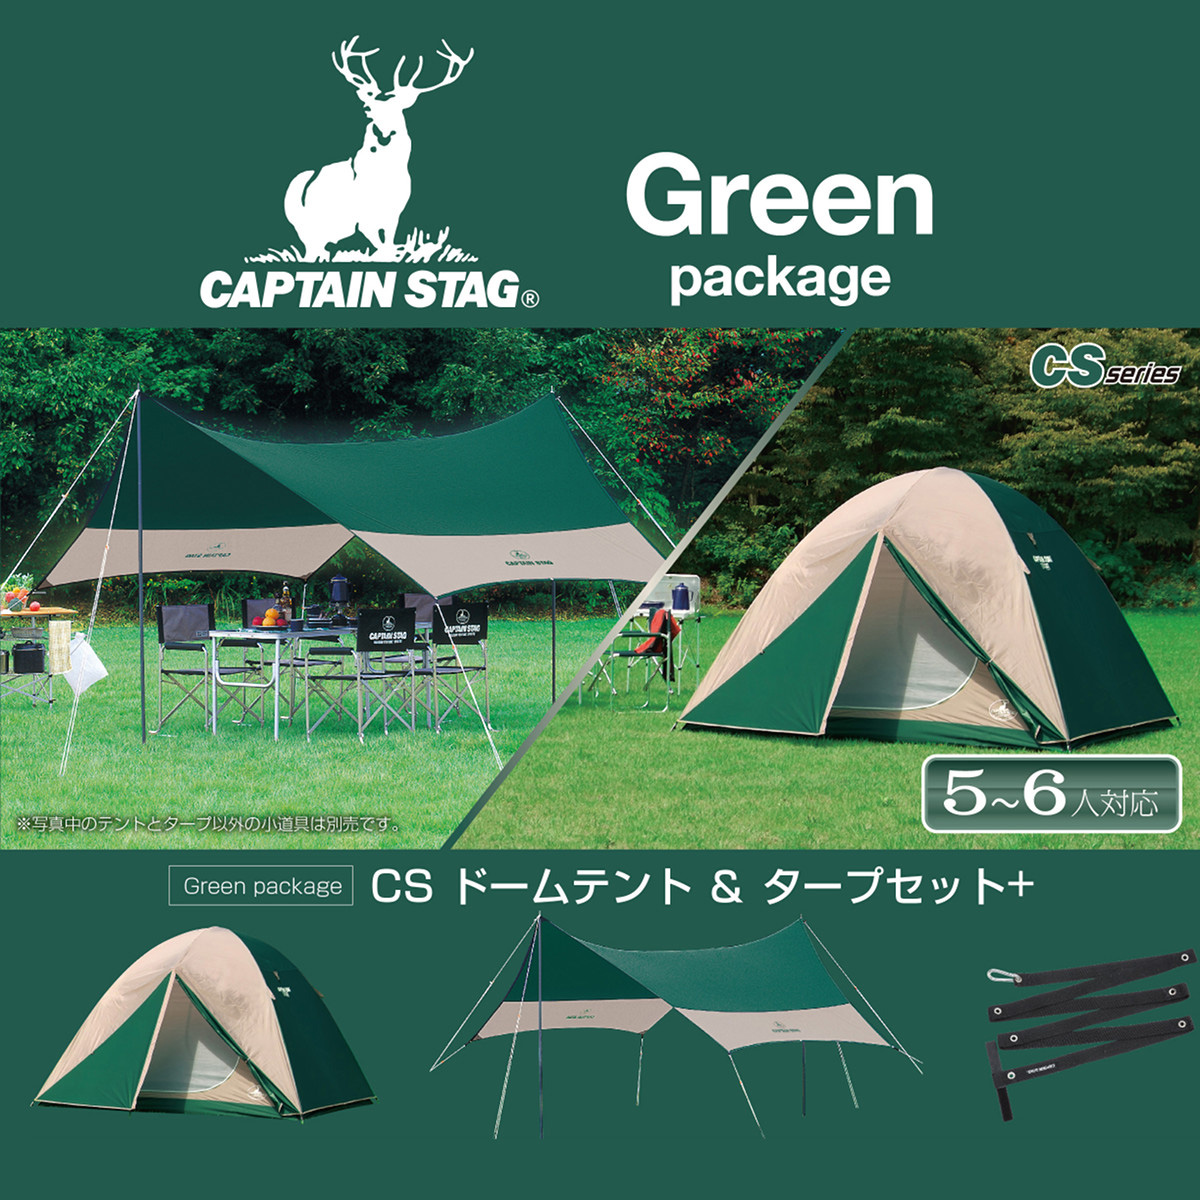 GREEN PACKAGE CSドームテント＆タープセット＋